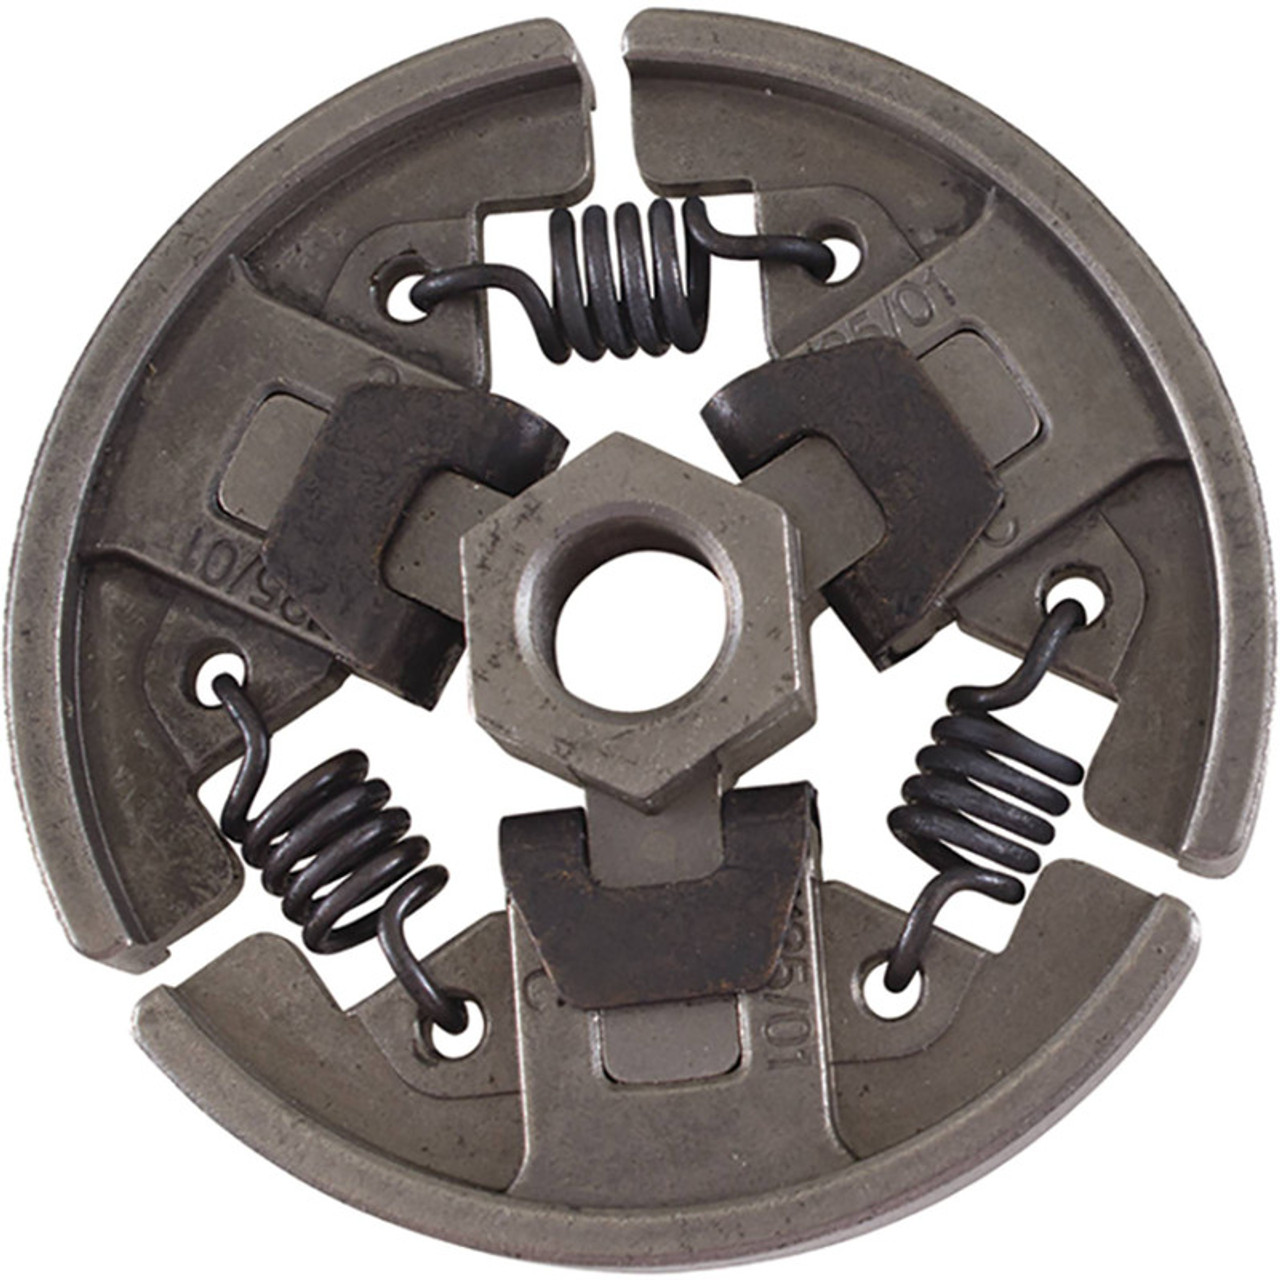 Clutch for Stihl 029 034 039 MS290 MS310 MS340 MS390 11271602000 11271602050 11271602051 1127 160 2000 1127 160 2050 1127 160 2051 chainsaw